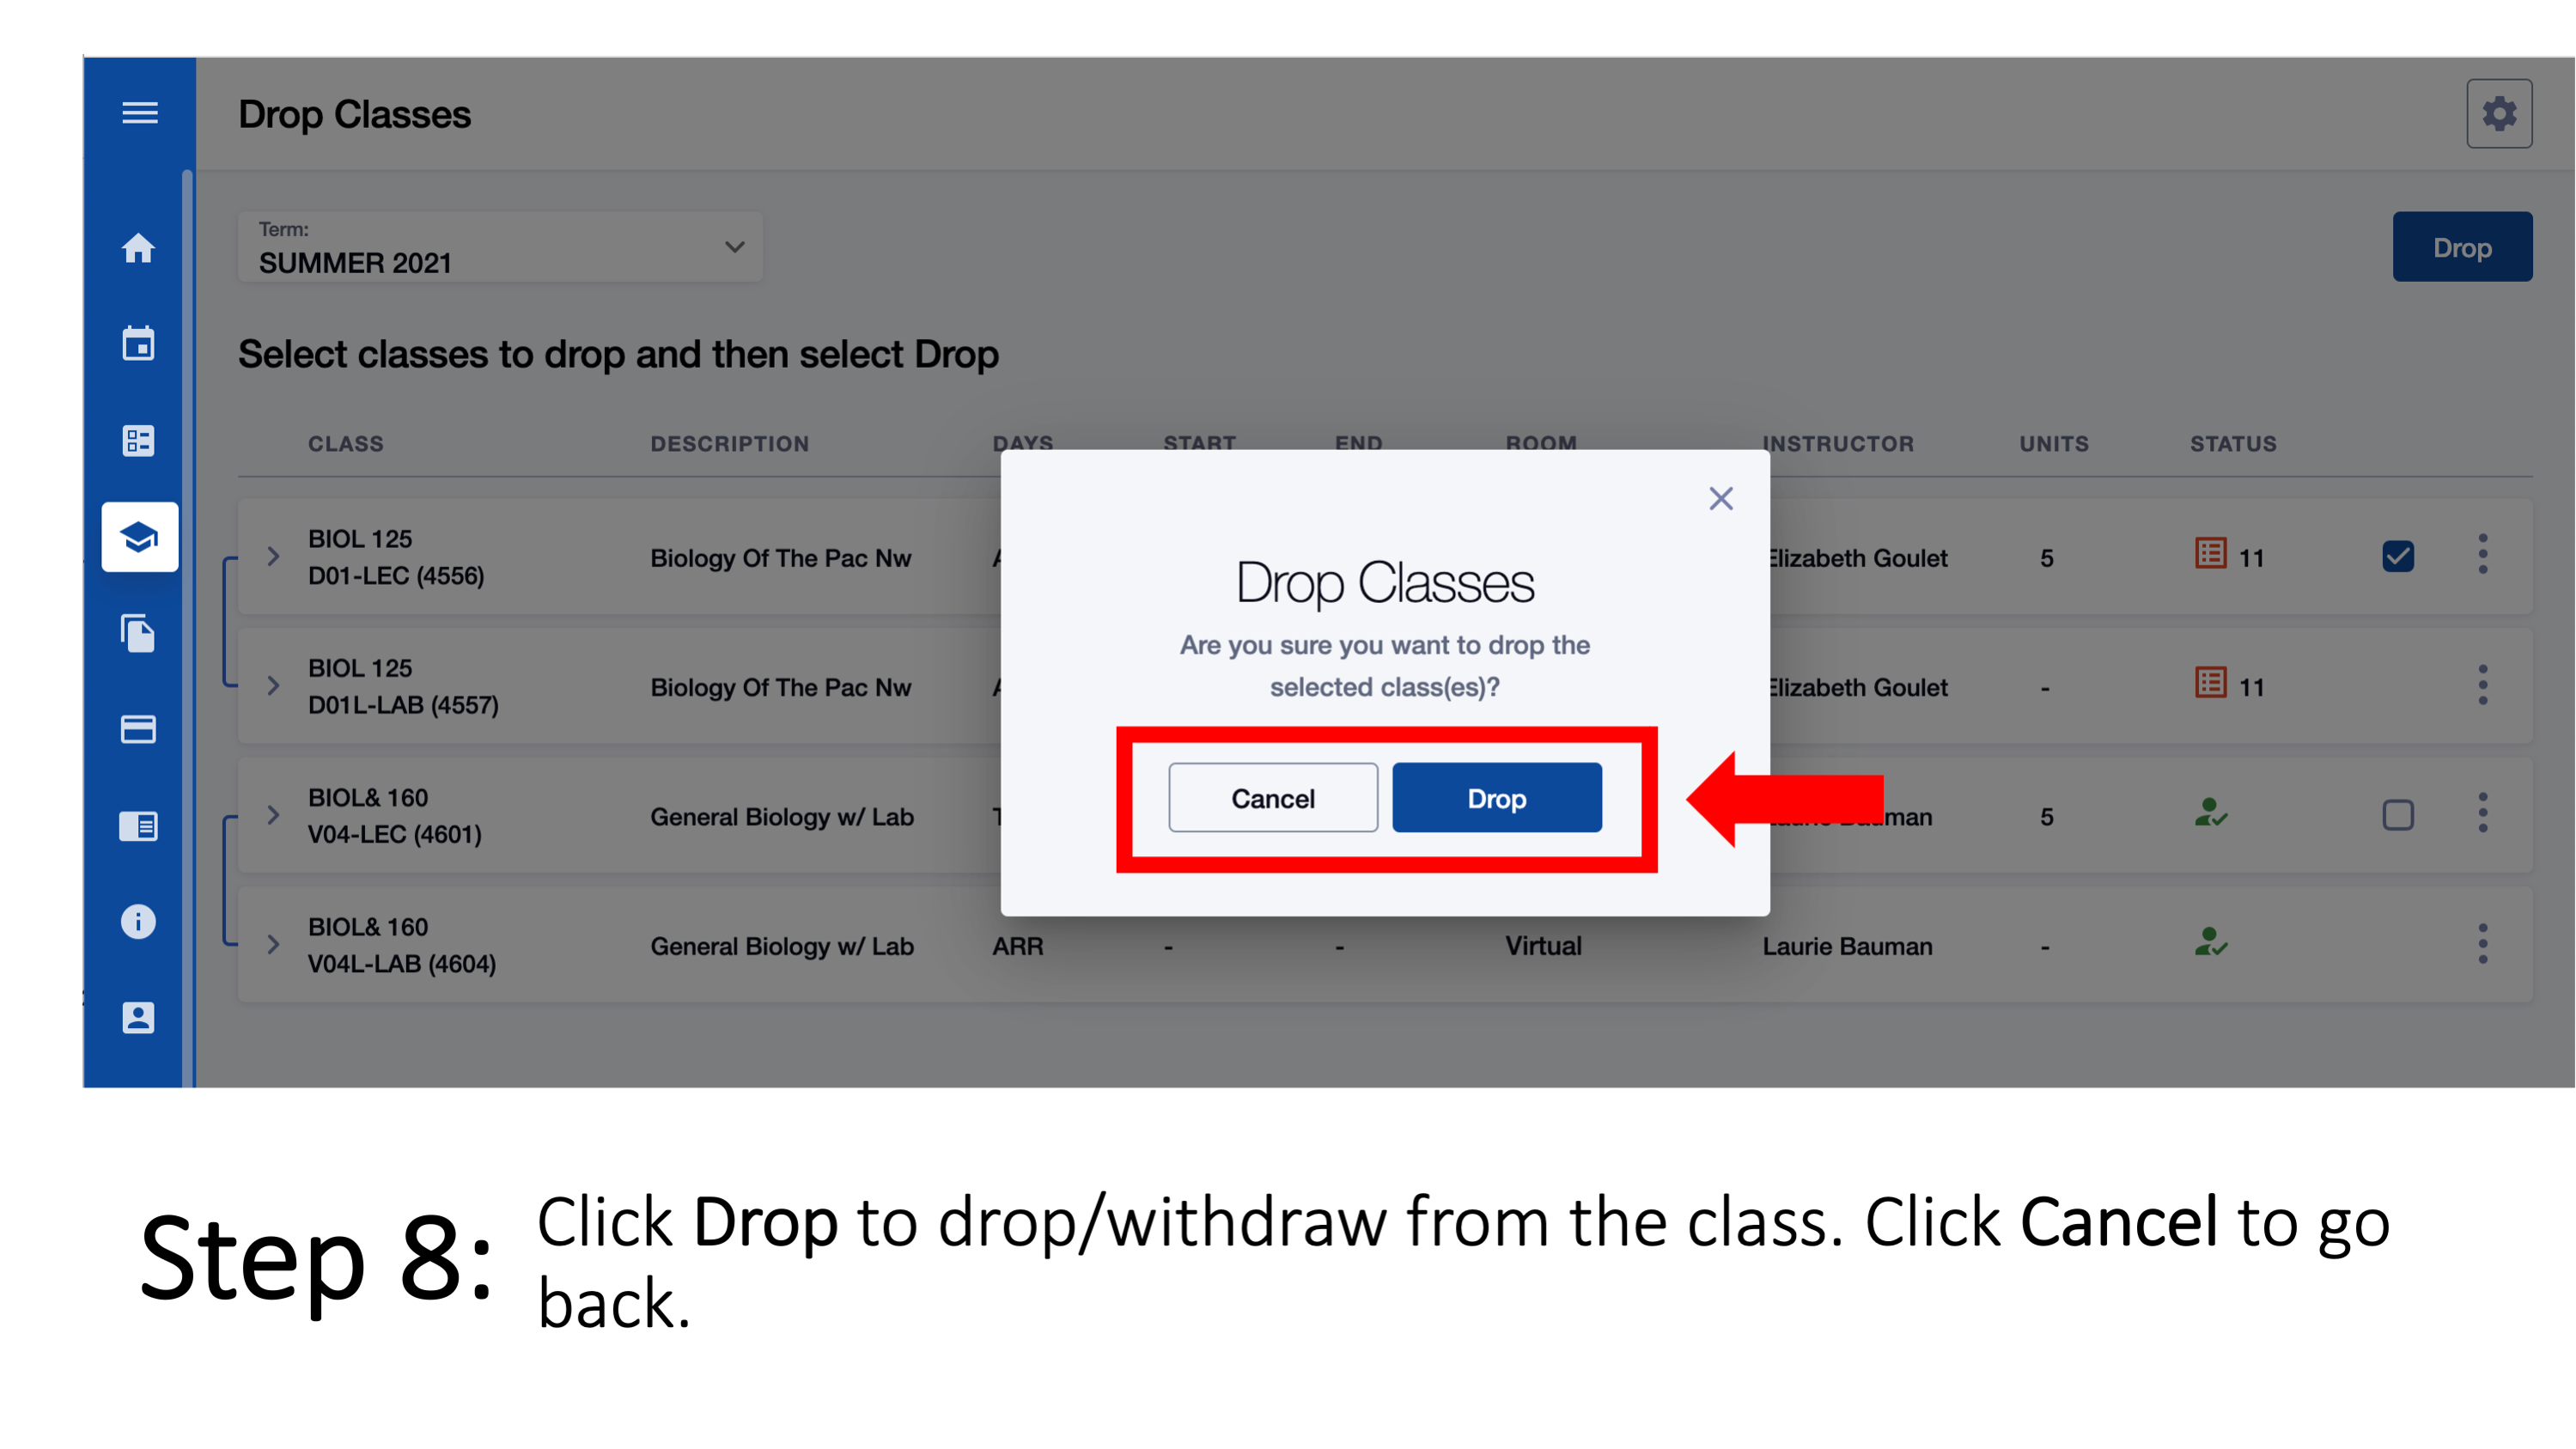 Step 8: Click Drop to drop/withdraw from the class. Click Cancel to go back.